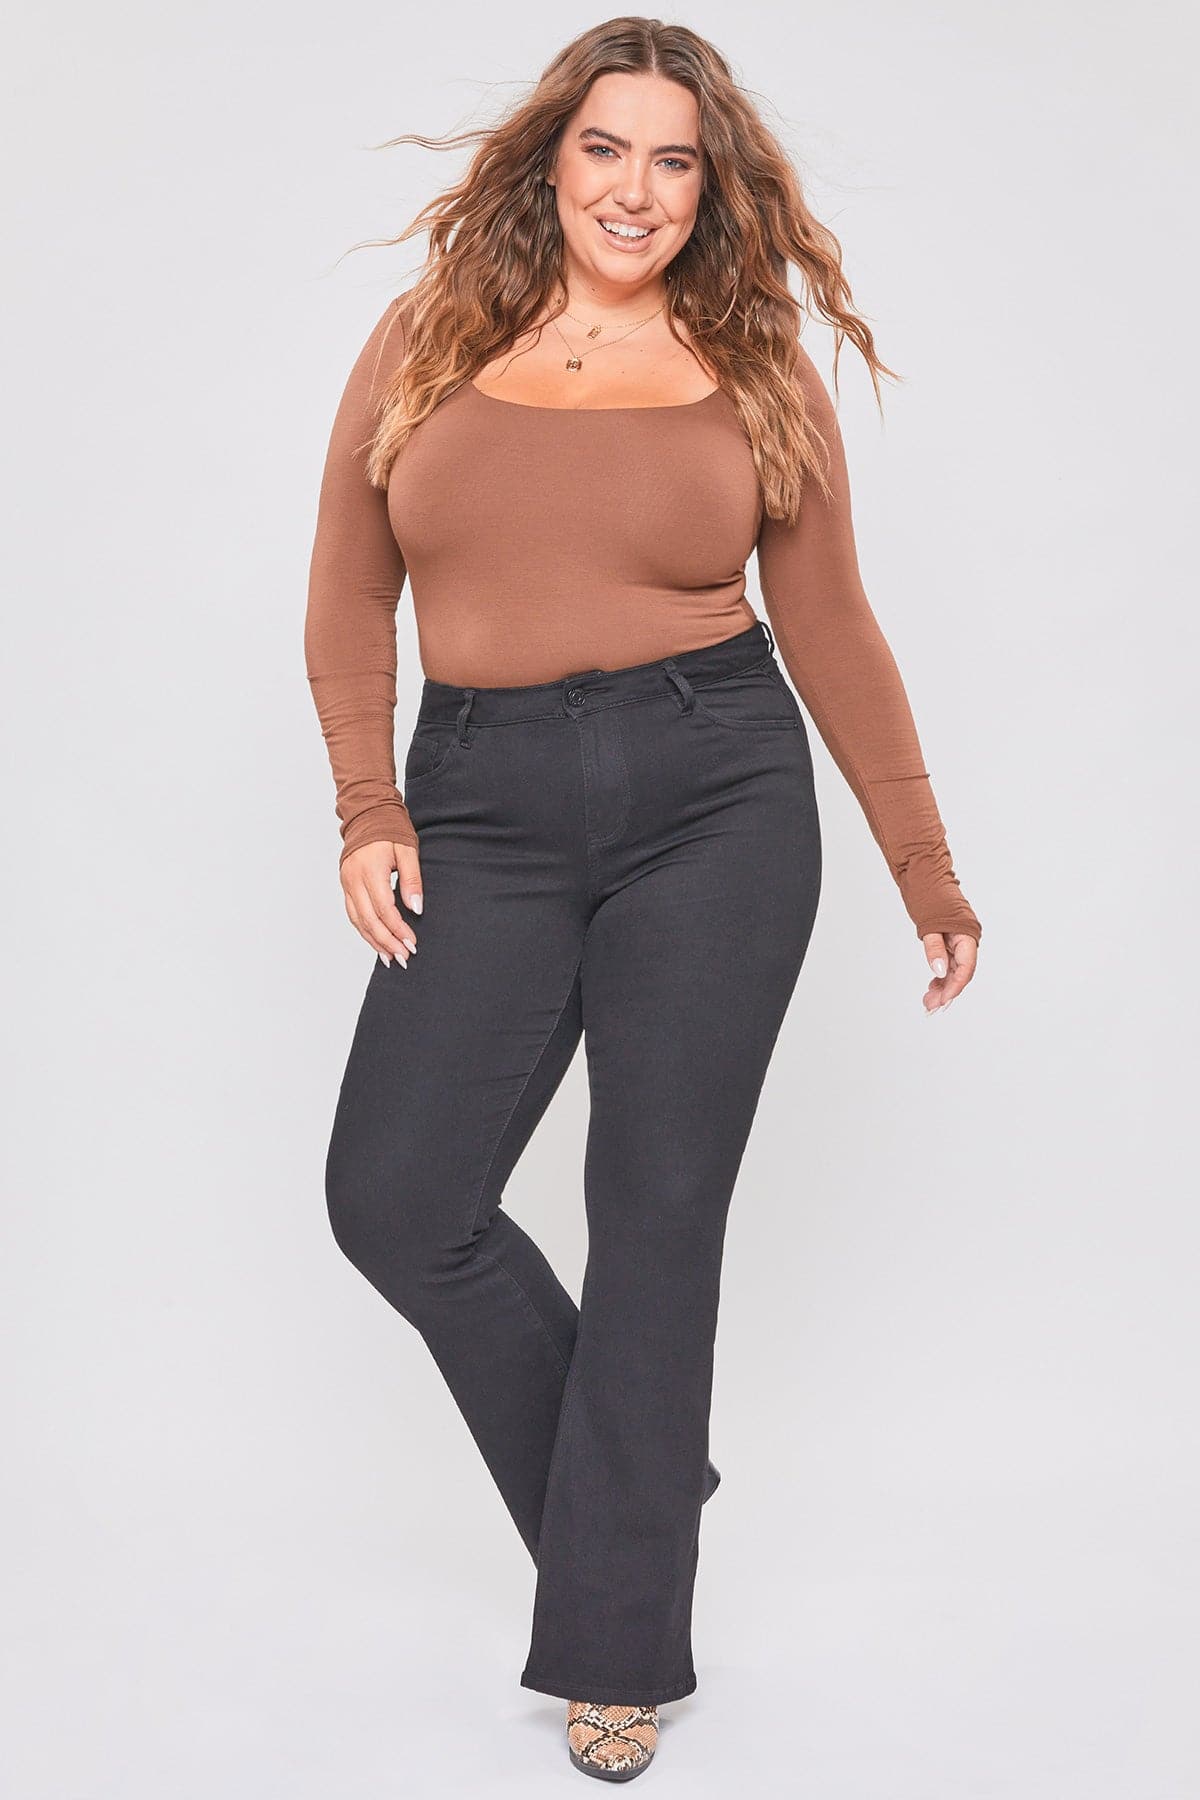 Buy Most Wanted Mid Rise Flare Jeans Plus Size for CAD 102.00